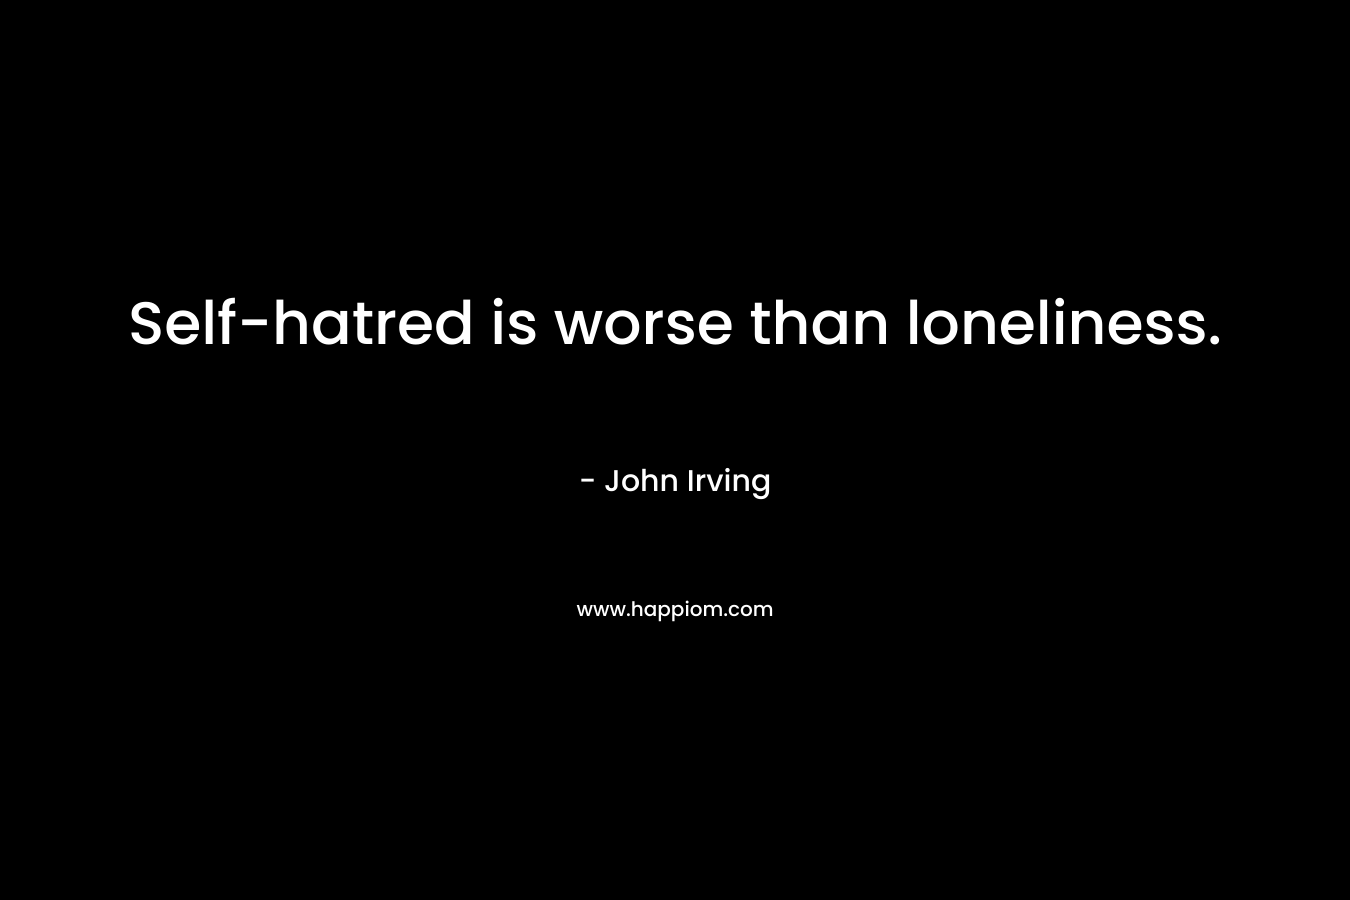 Self-hatred is worse than loneliness.